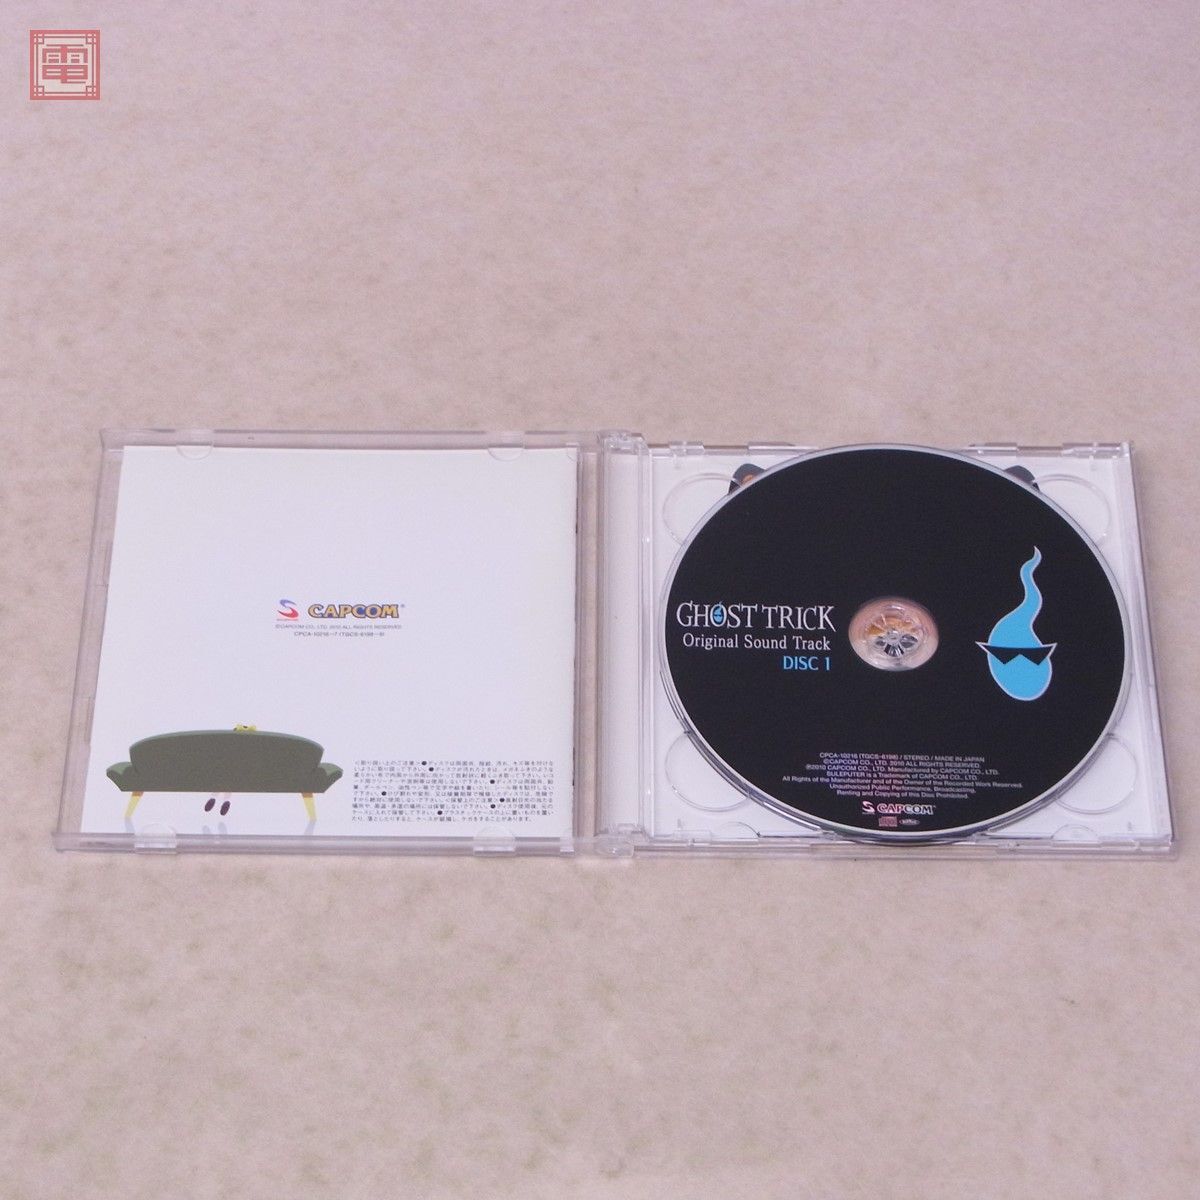  operation guarantee goods CD ghost Trick original * soundtrack Capcom CAPCOM GHOST TRICK Original Sound Track[10